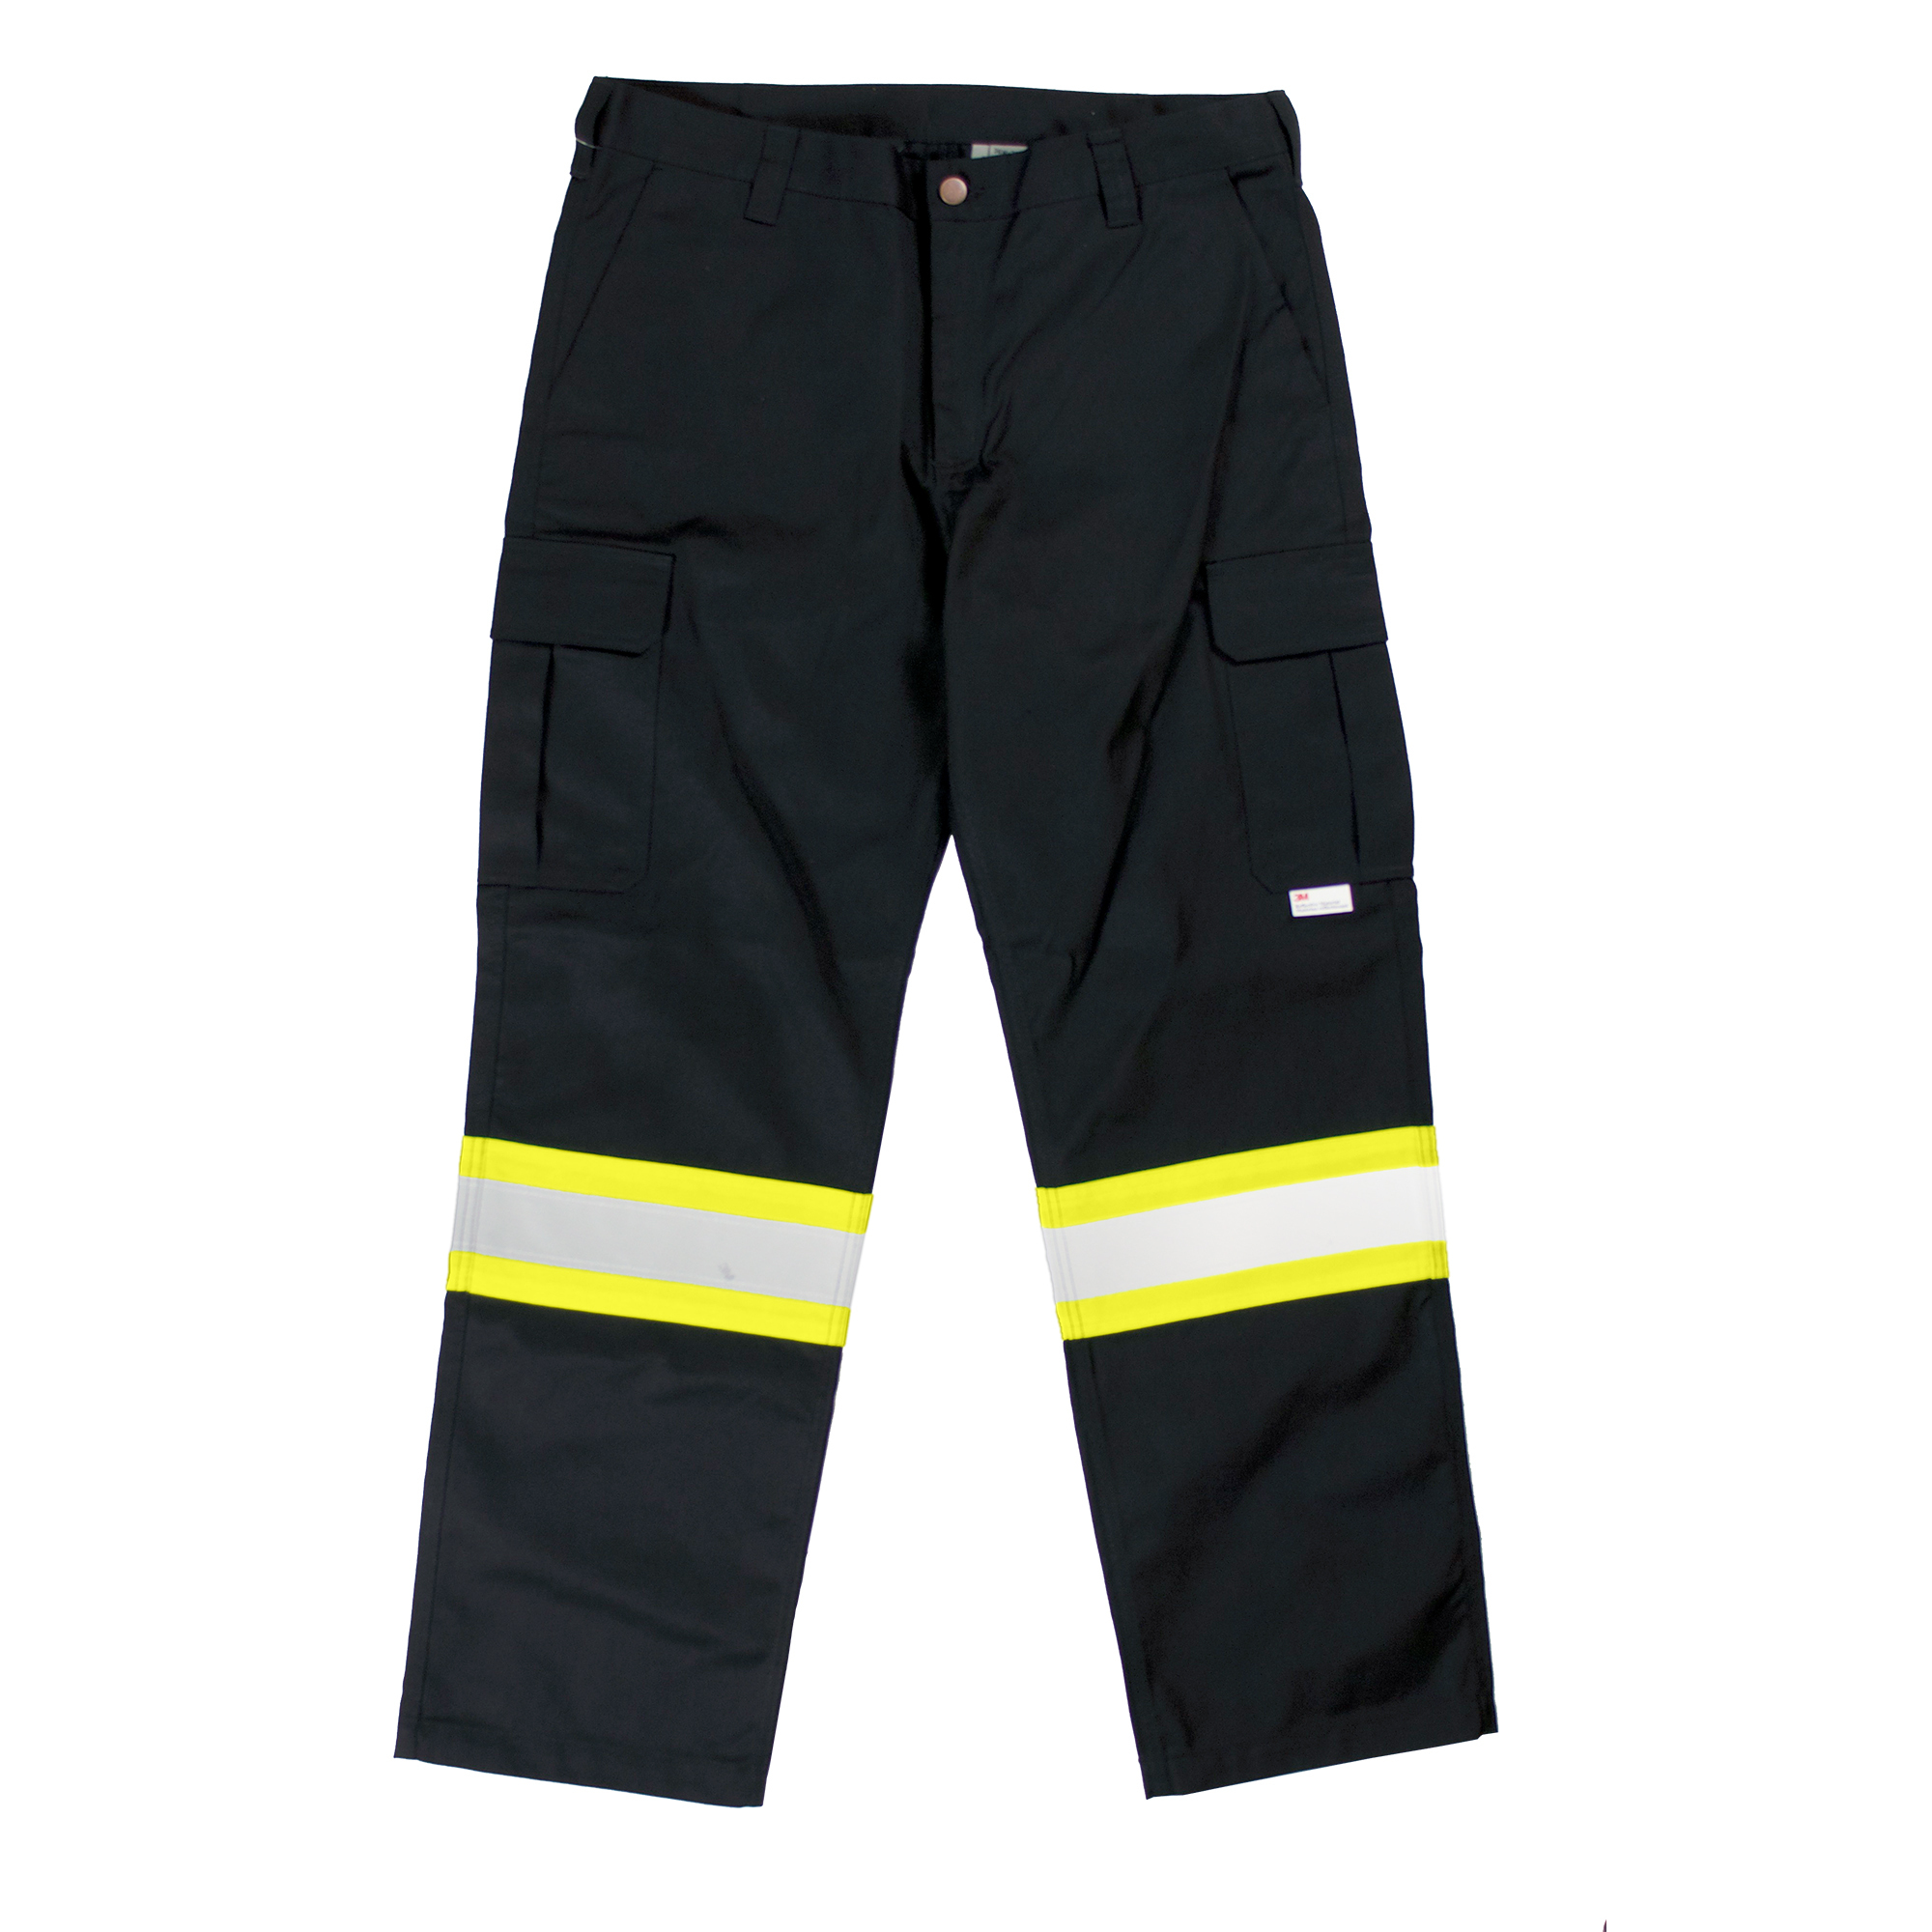 Tough Duck, Safety Cargo Utility Pant, Waist 36 in, Inseam 32 in, Color Black, Model S60711